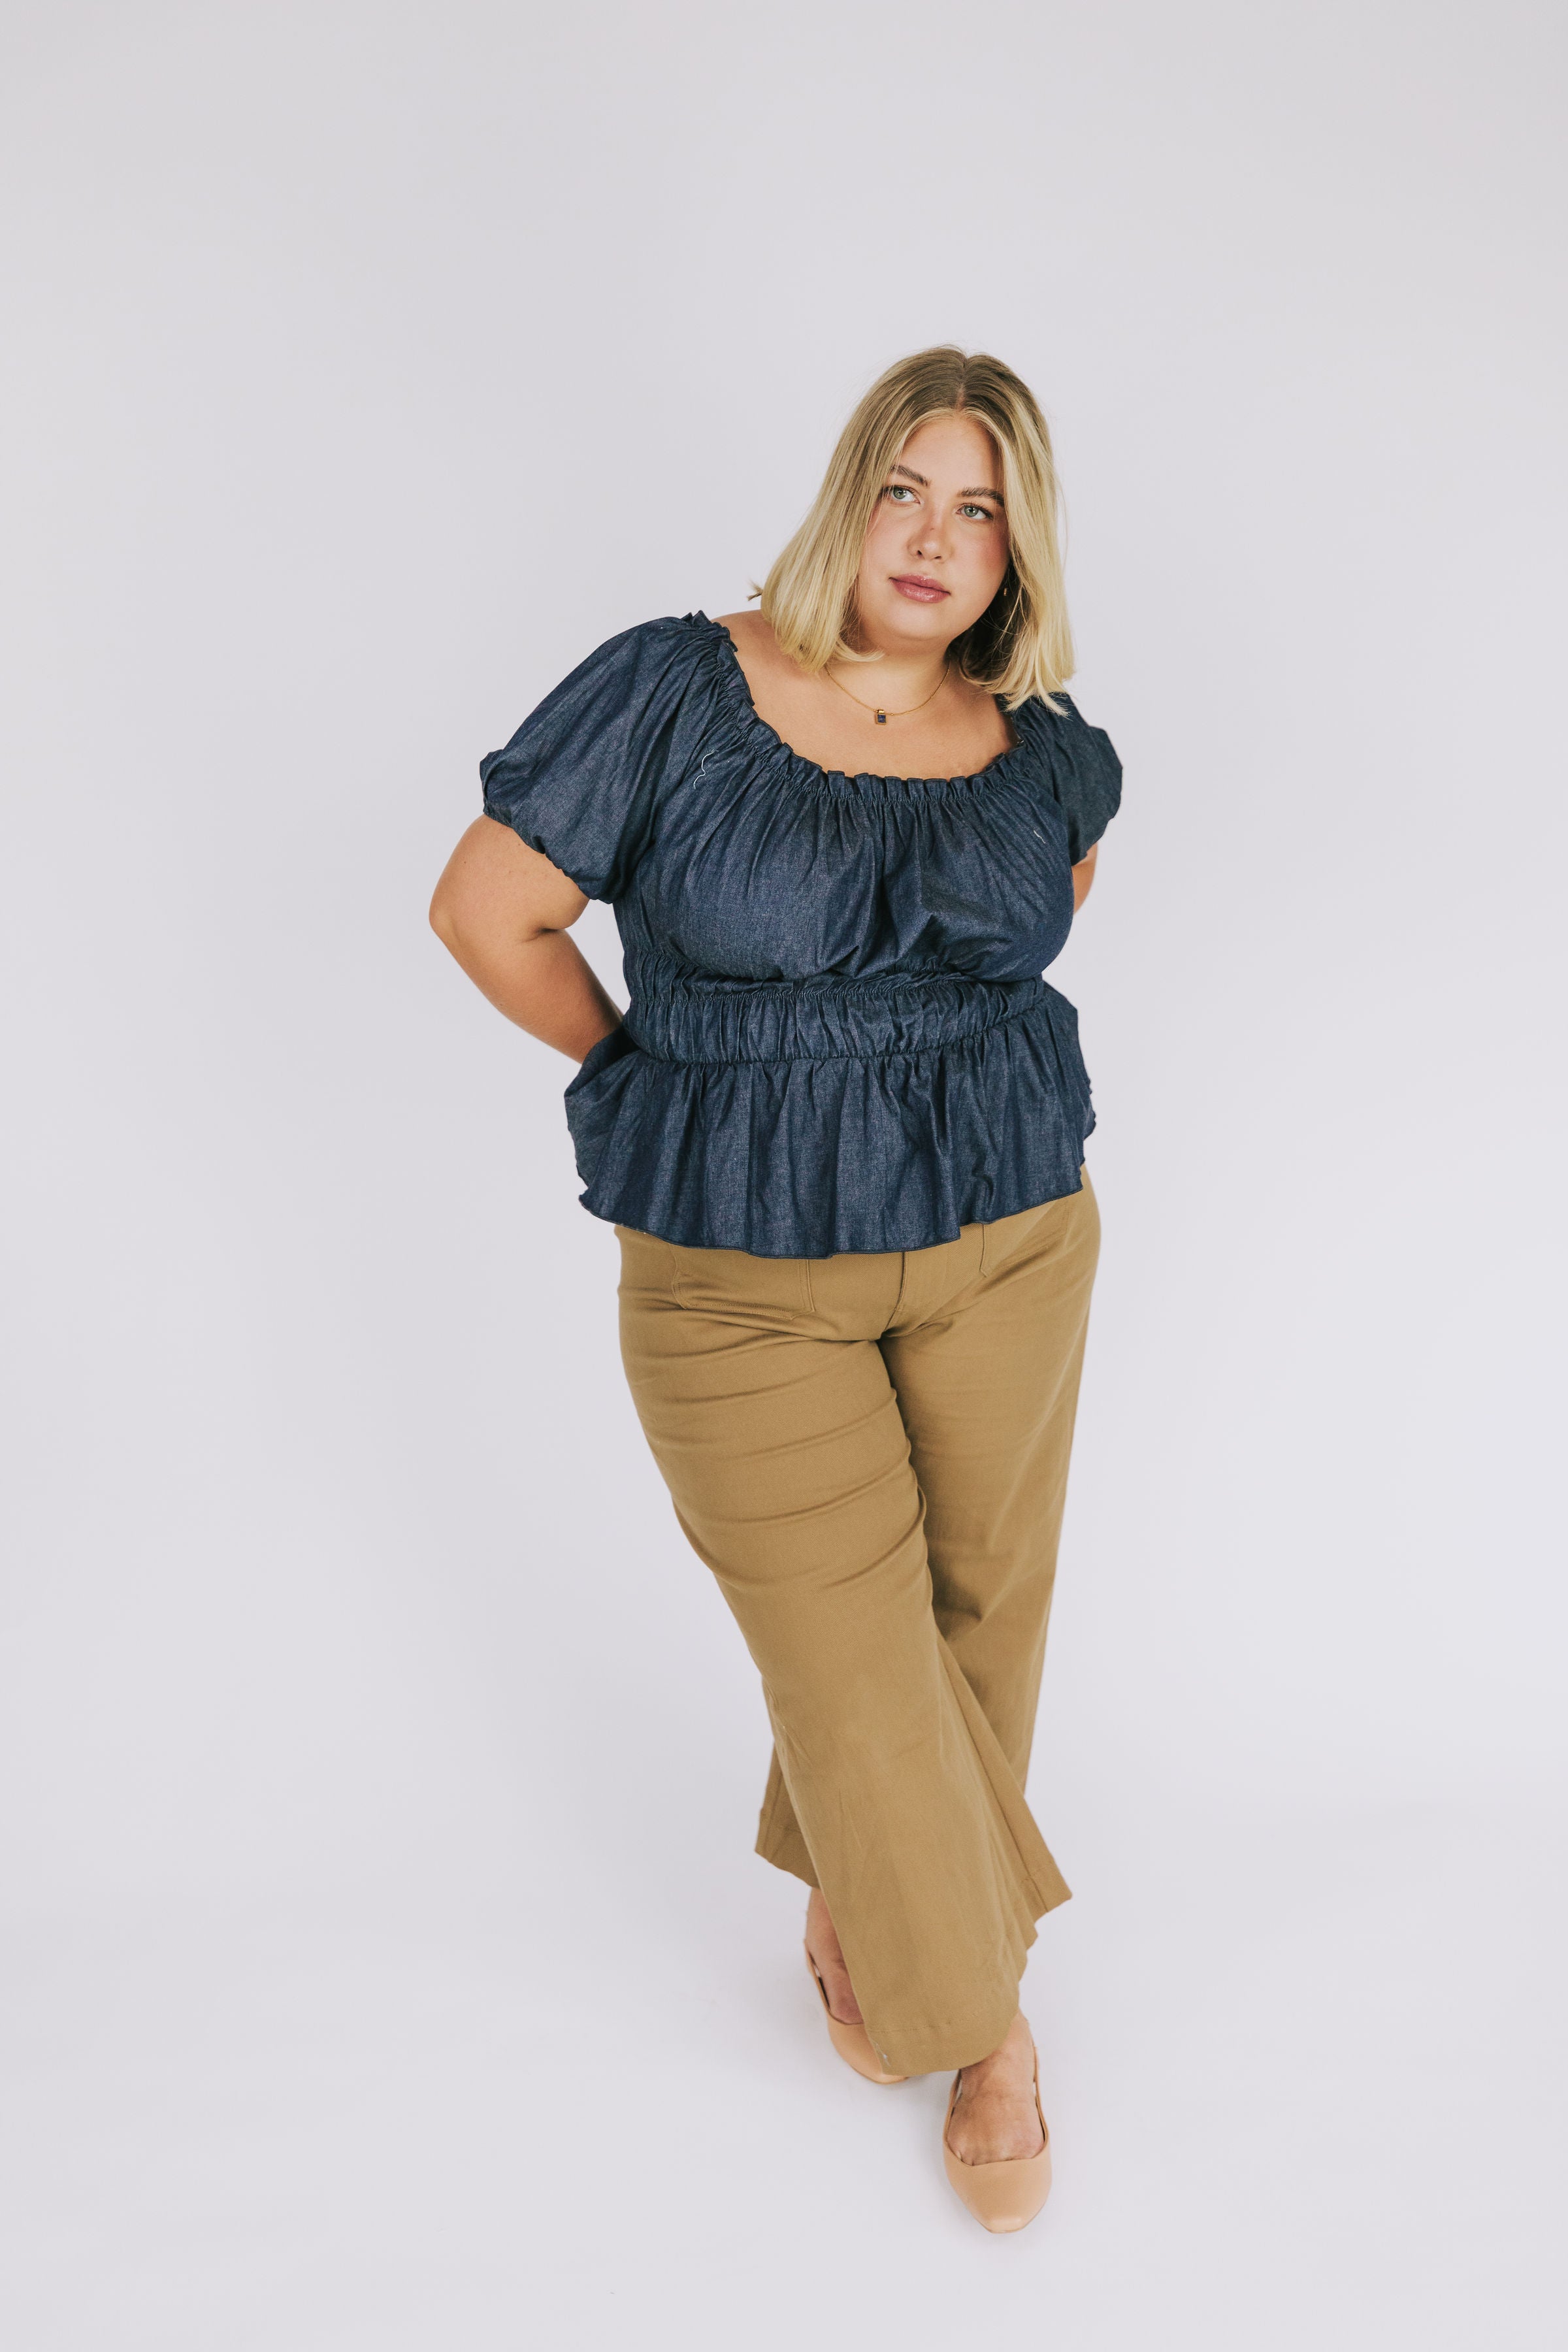 PLUS SIZE - Bigger Than This Top